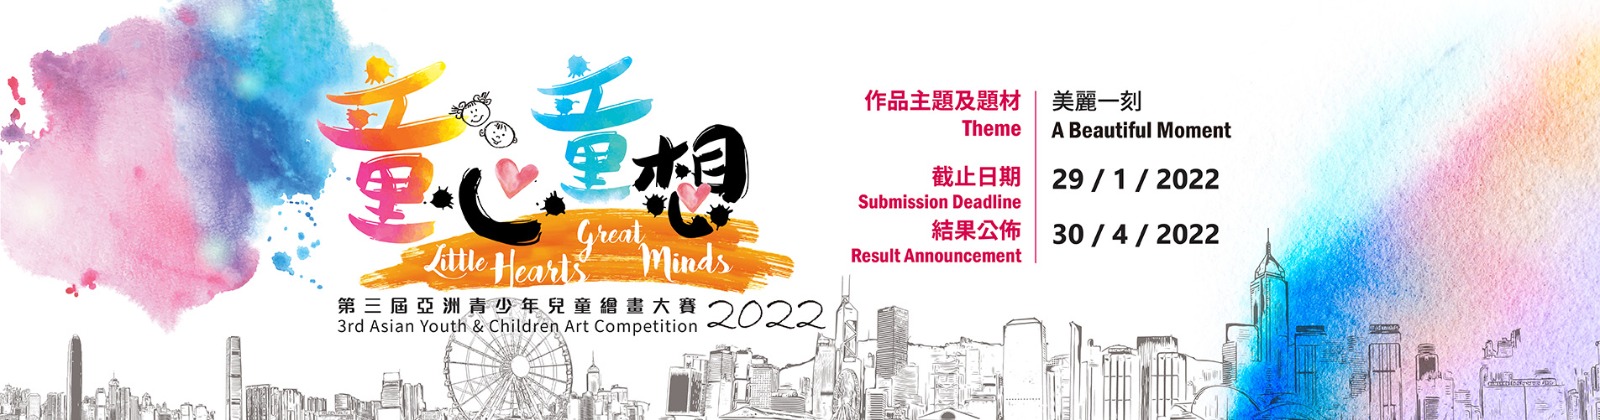 “Little Hearts ‧ Great Minds” 3rd Asian Youth & Children Art Competition 2022